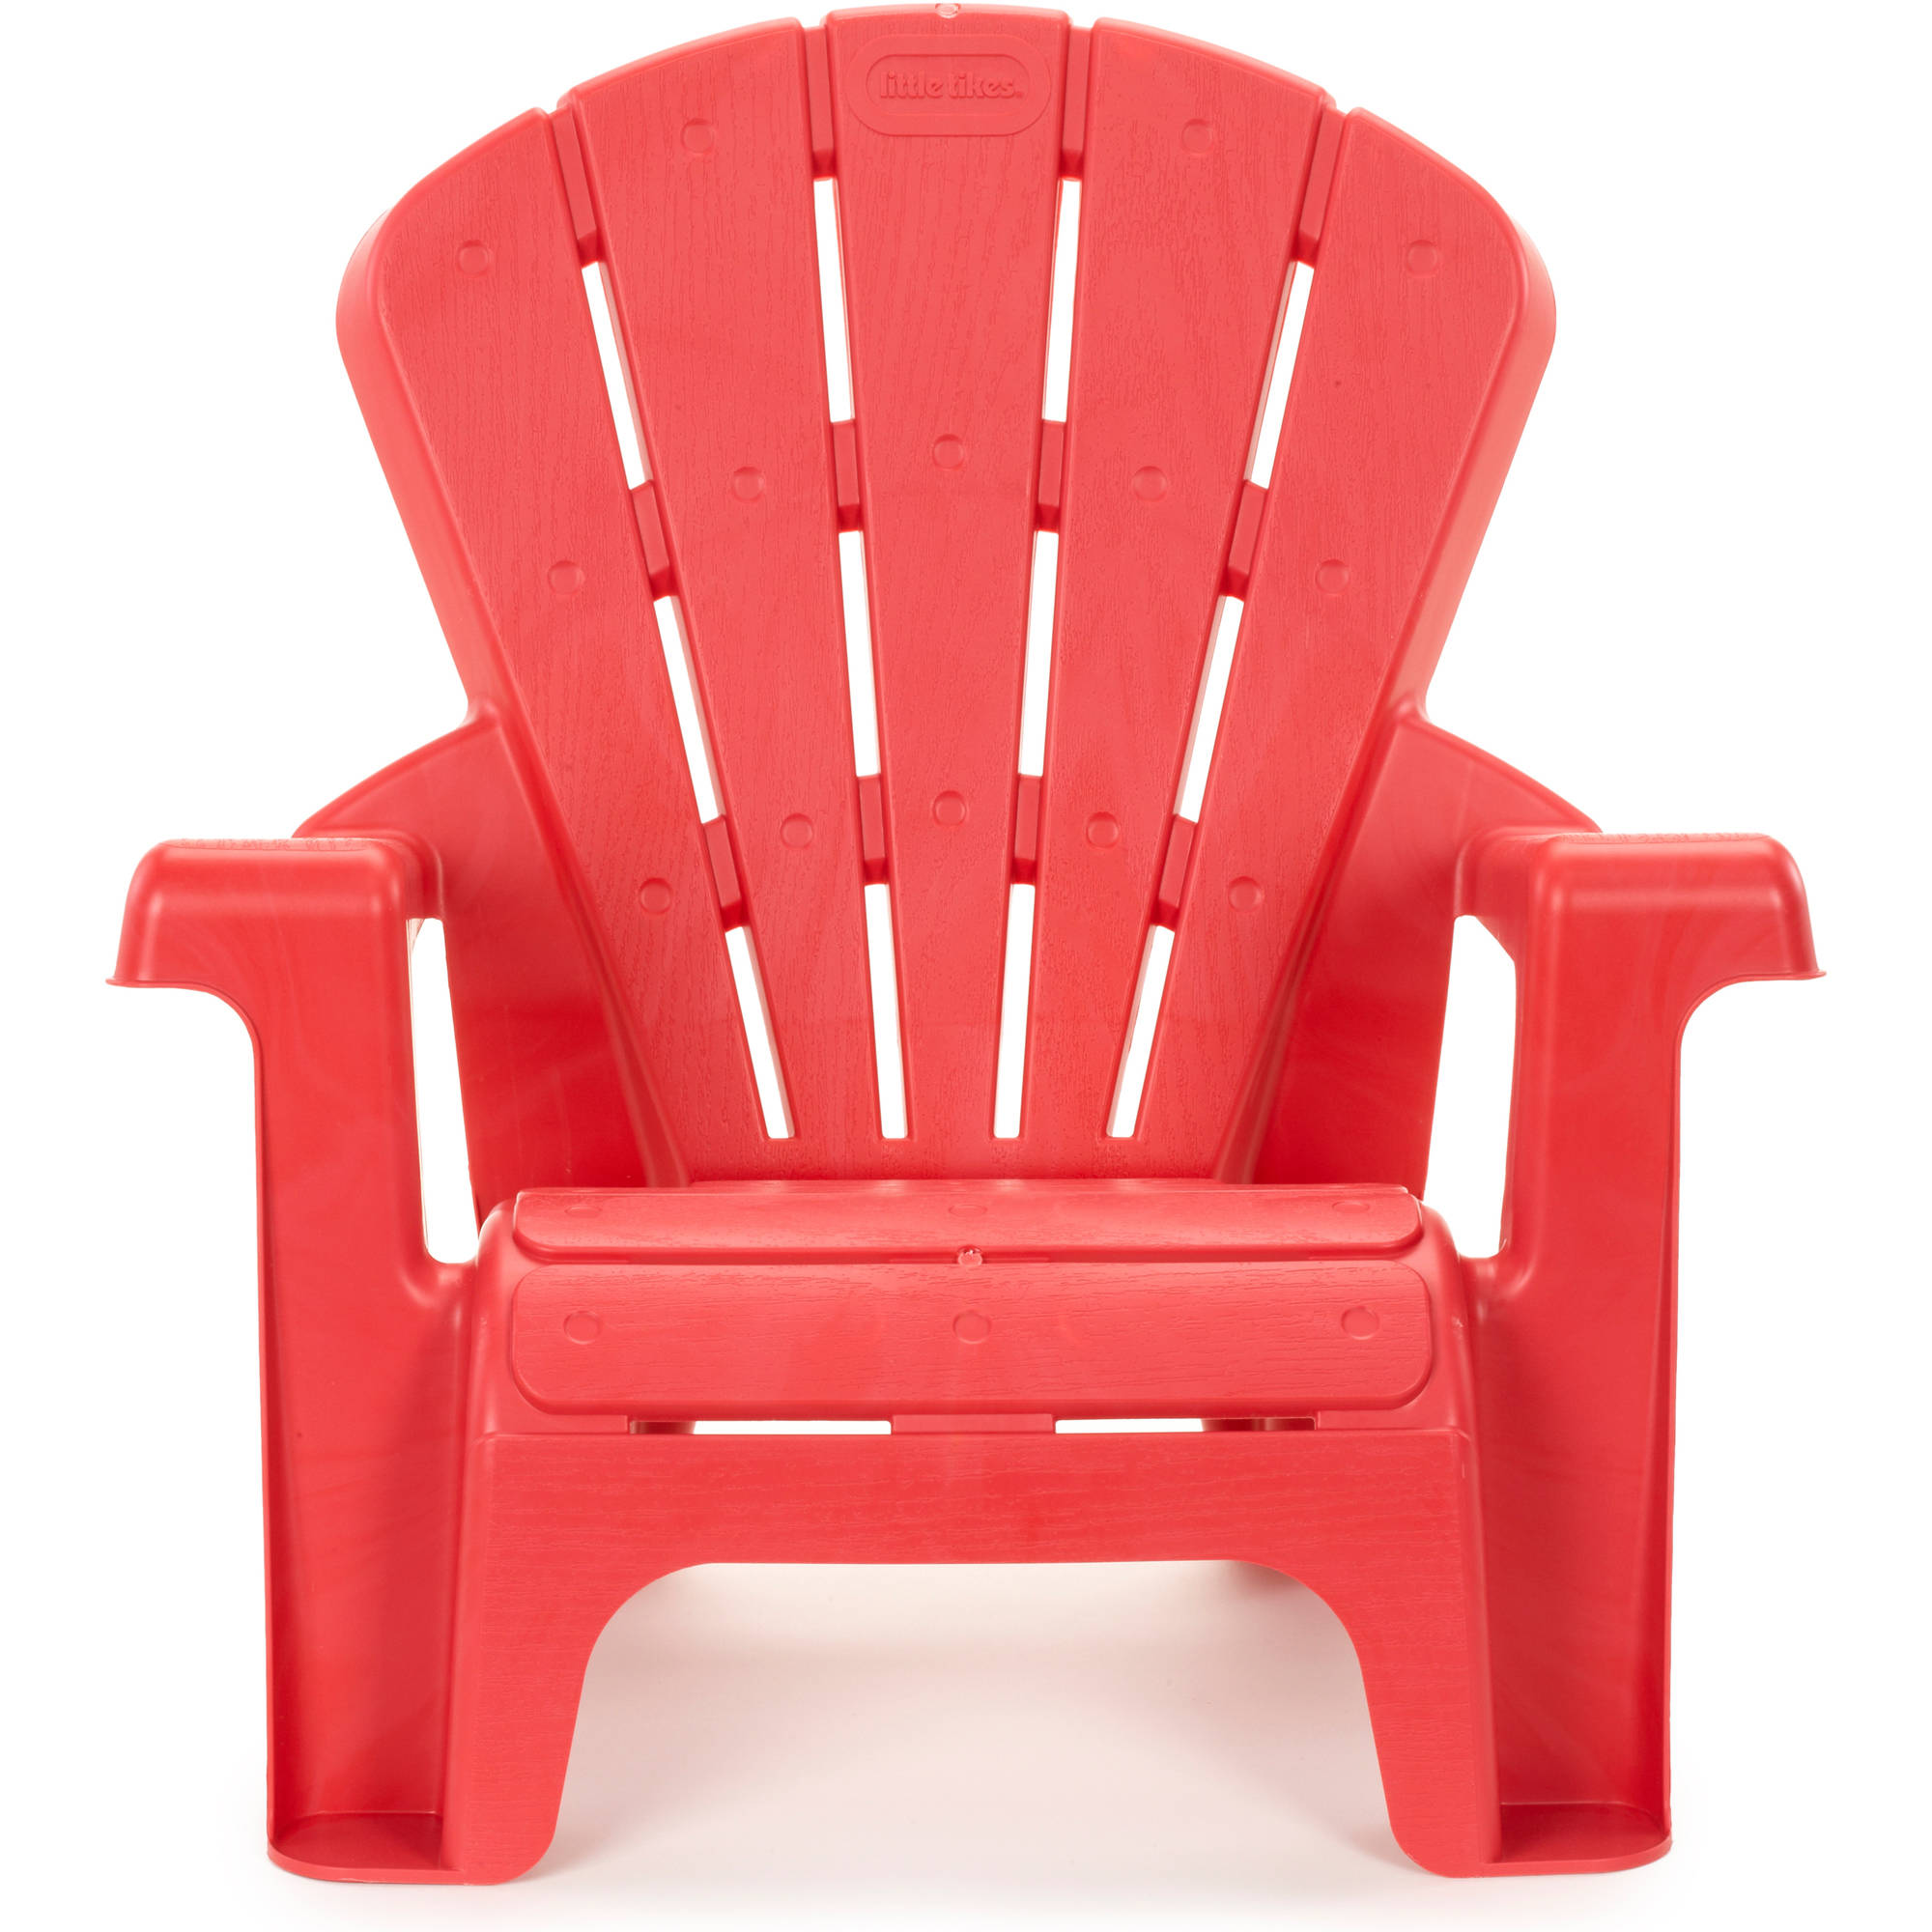 Little Tikes Kids Garden Chair, Kids Furniture For Activity Playroom and Patio, Fits Toddlers and Kids, Red - available in multiple colors - image 1 of 5